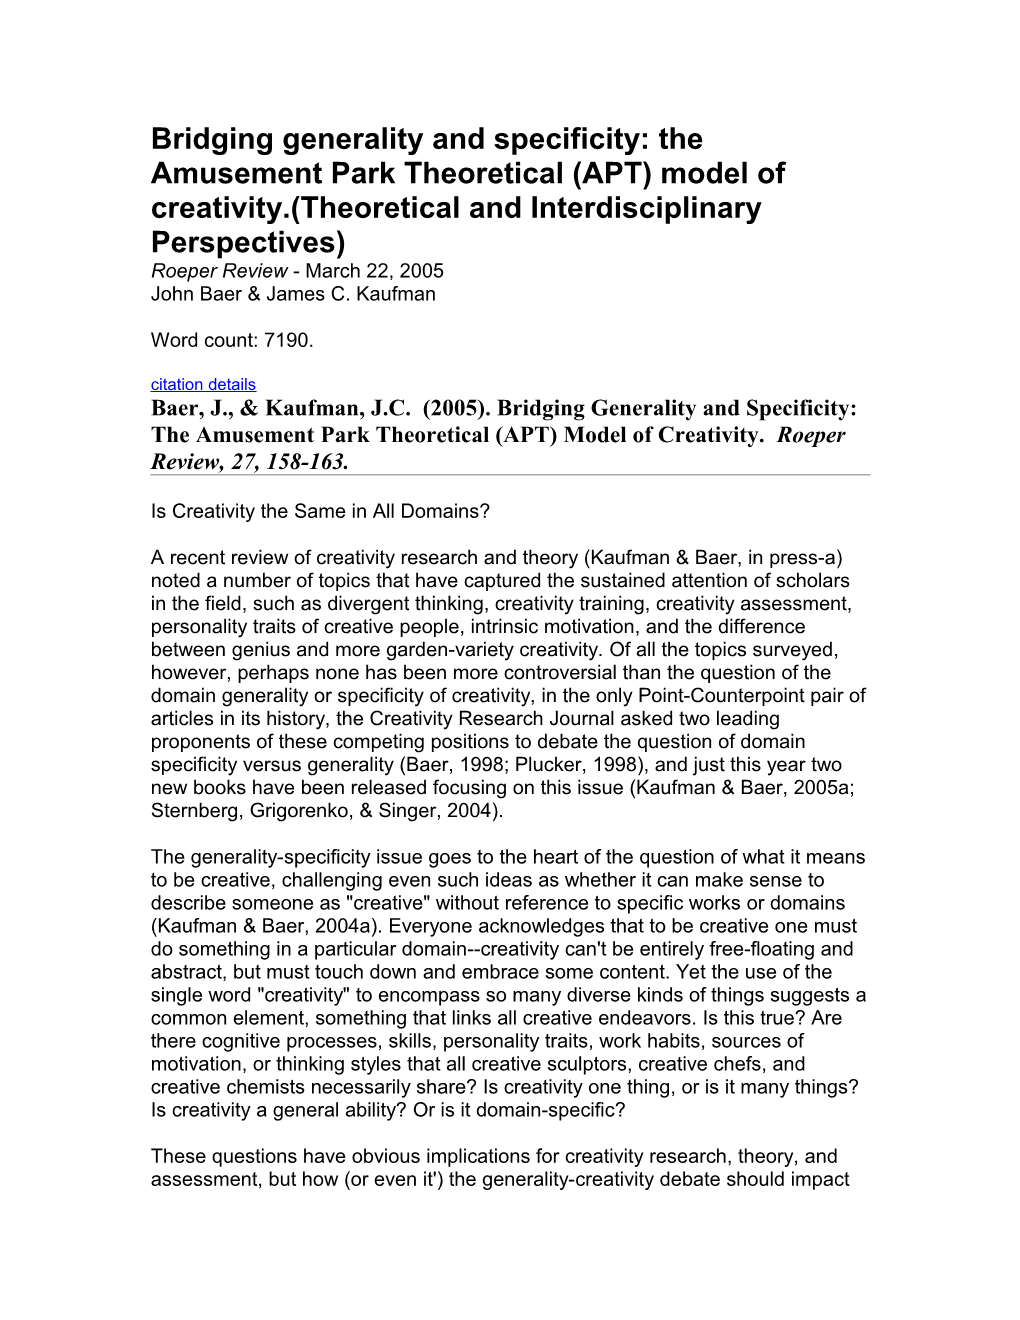 Bridging Generality and Specificity: the Amusement Park Theoretical (APT) Model Of